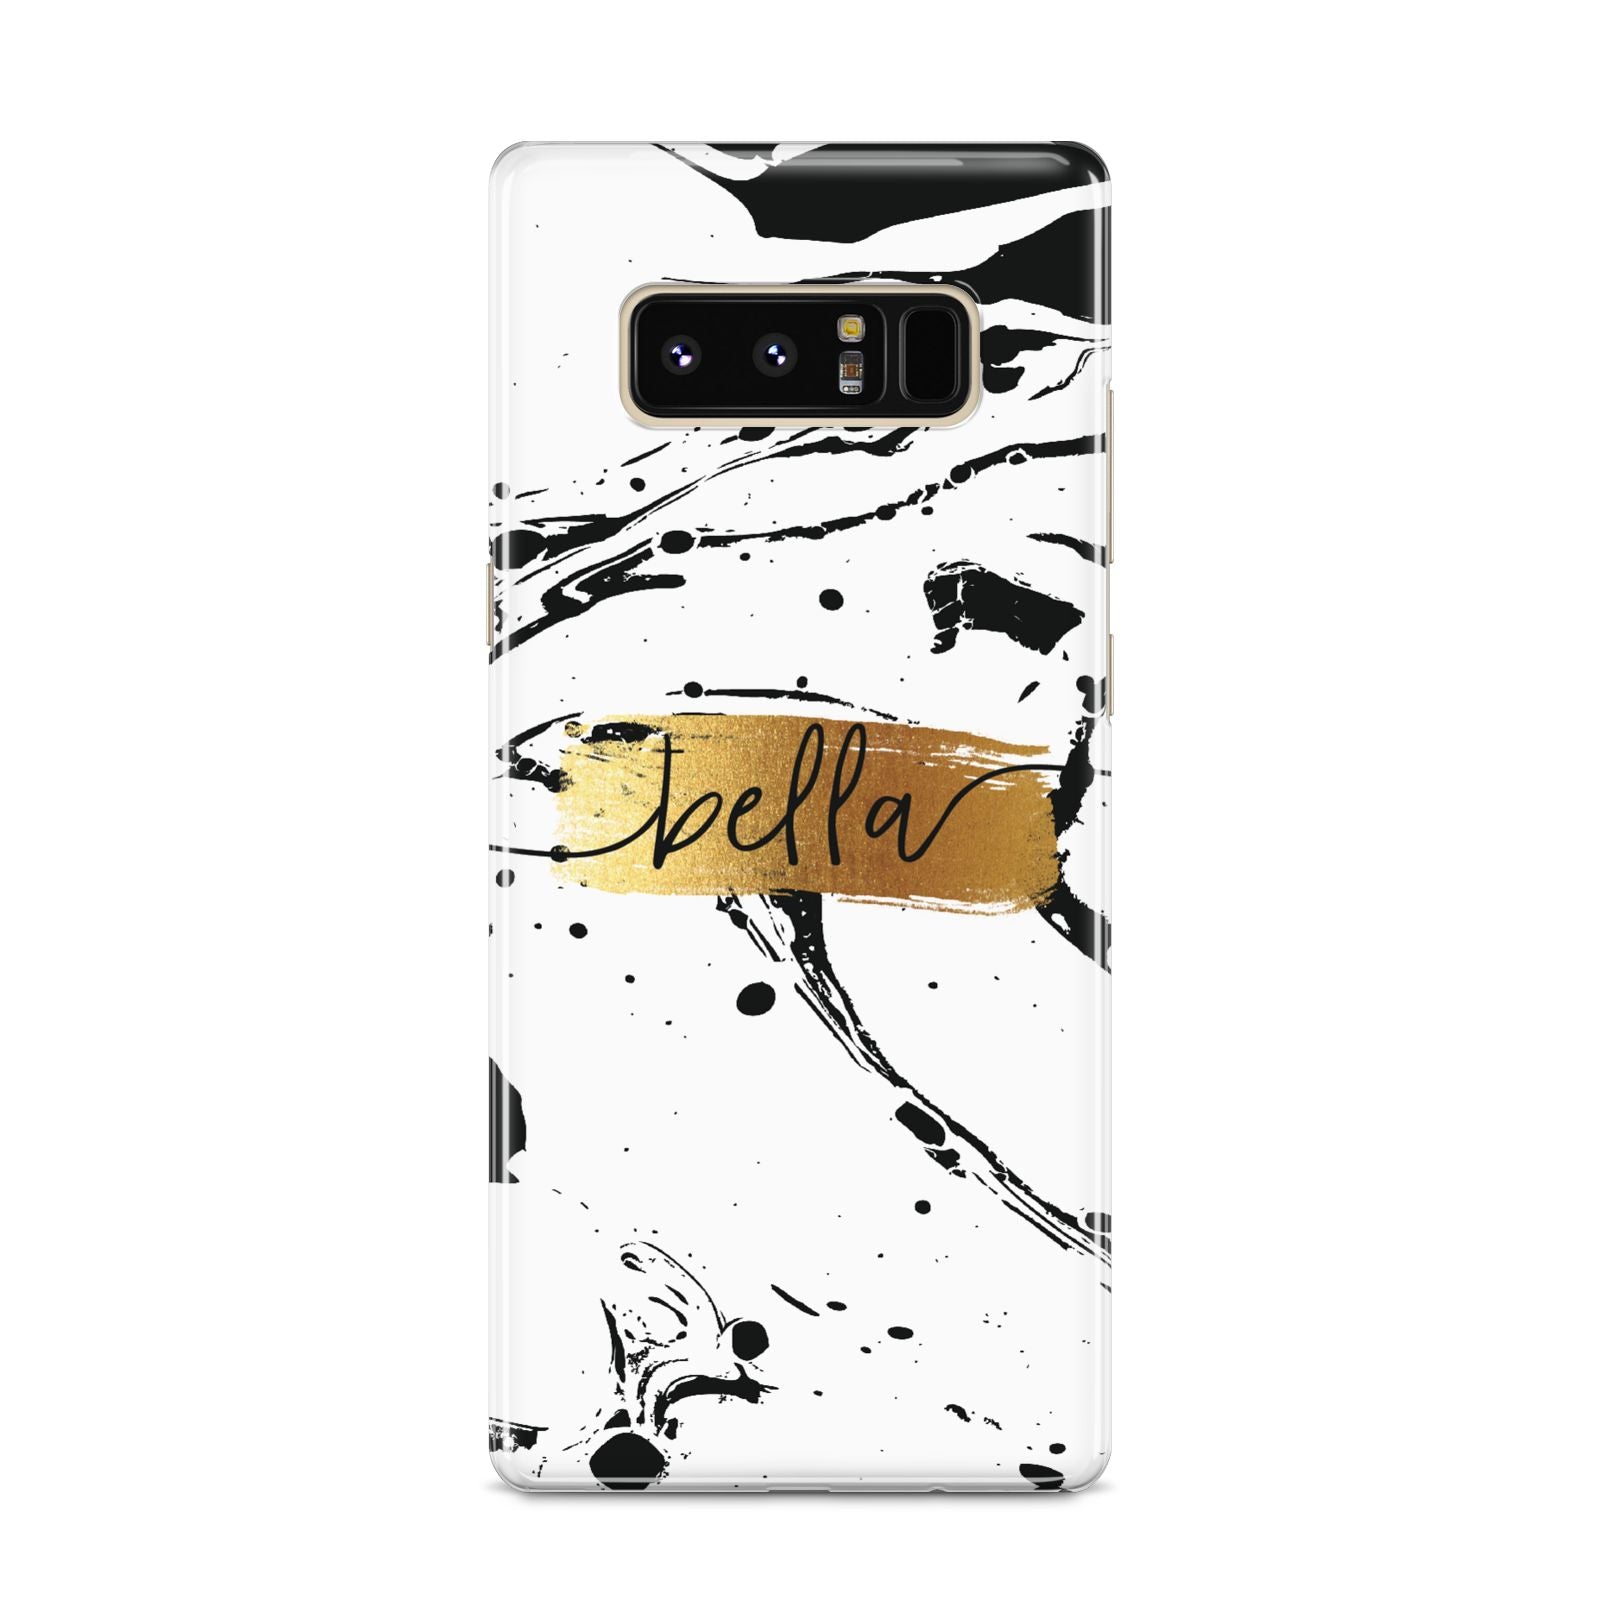 Personalised White Gold Swirl Marble Samsung Galaxy S8 Case